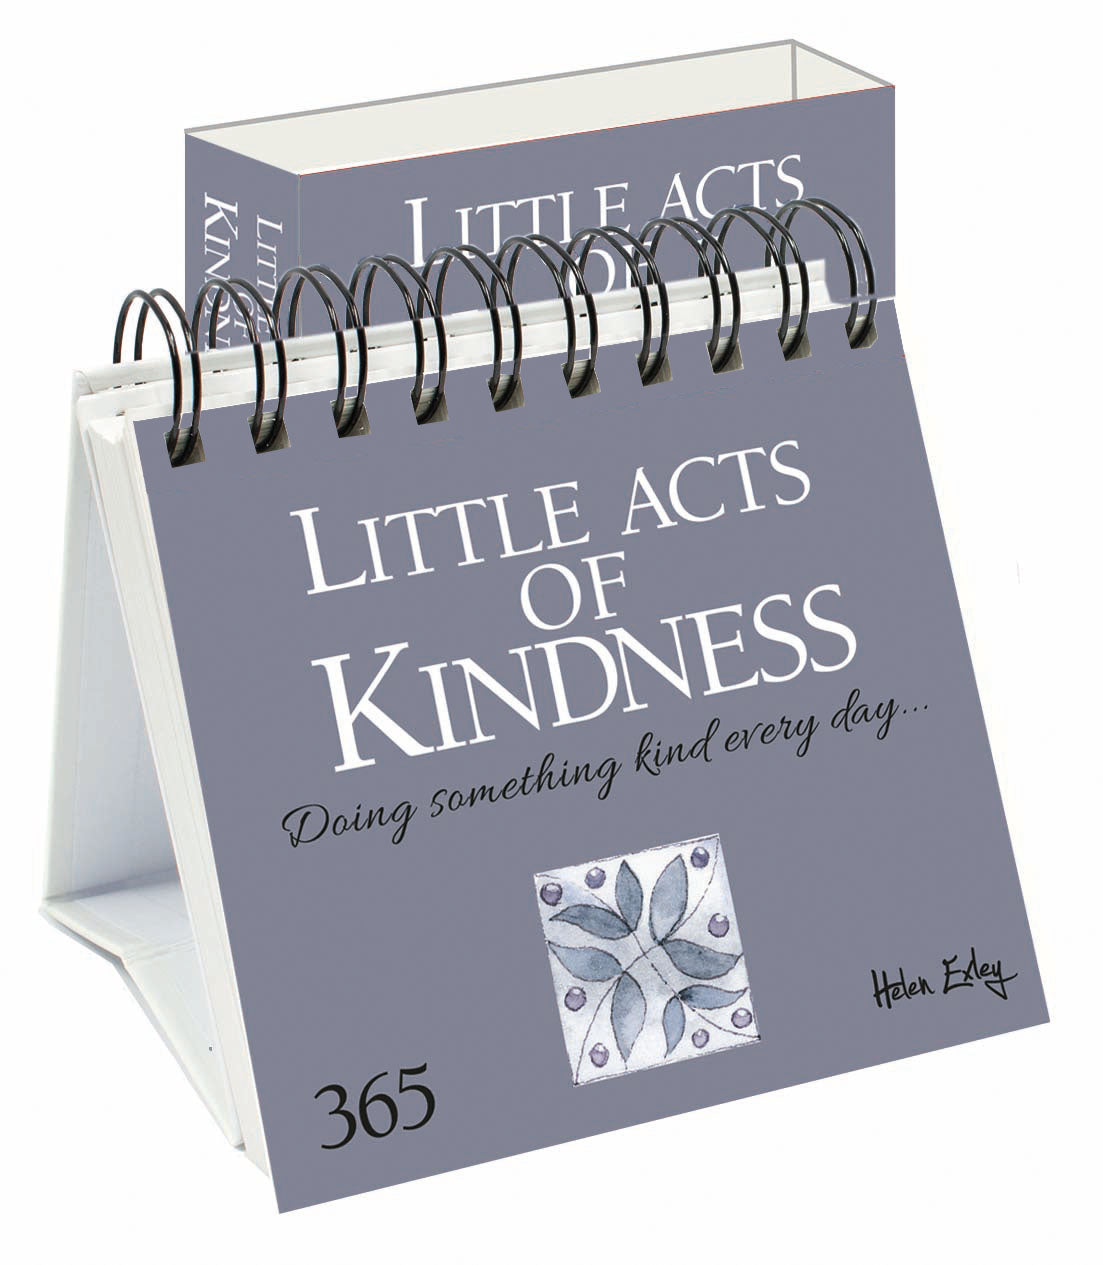 365 Little Acts of Kindness - Doing something kind every day...